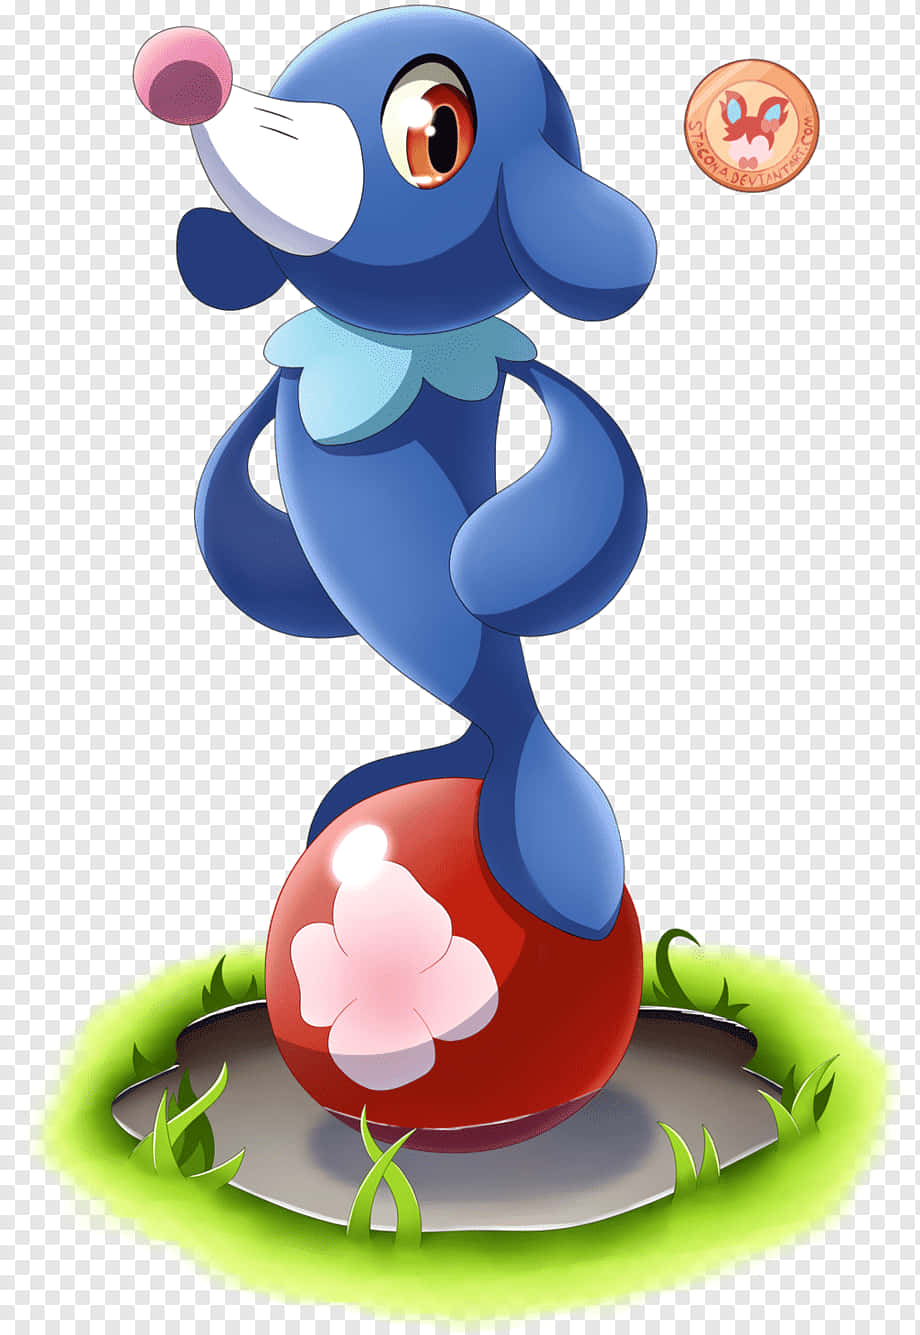 Popplio Standing On A Red Ball Wallpaper